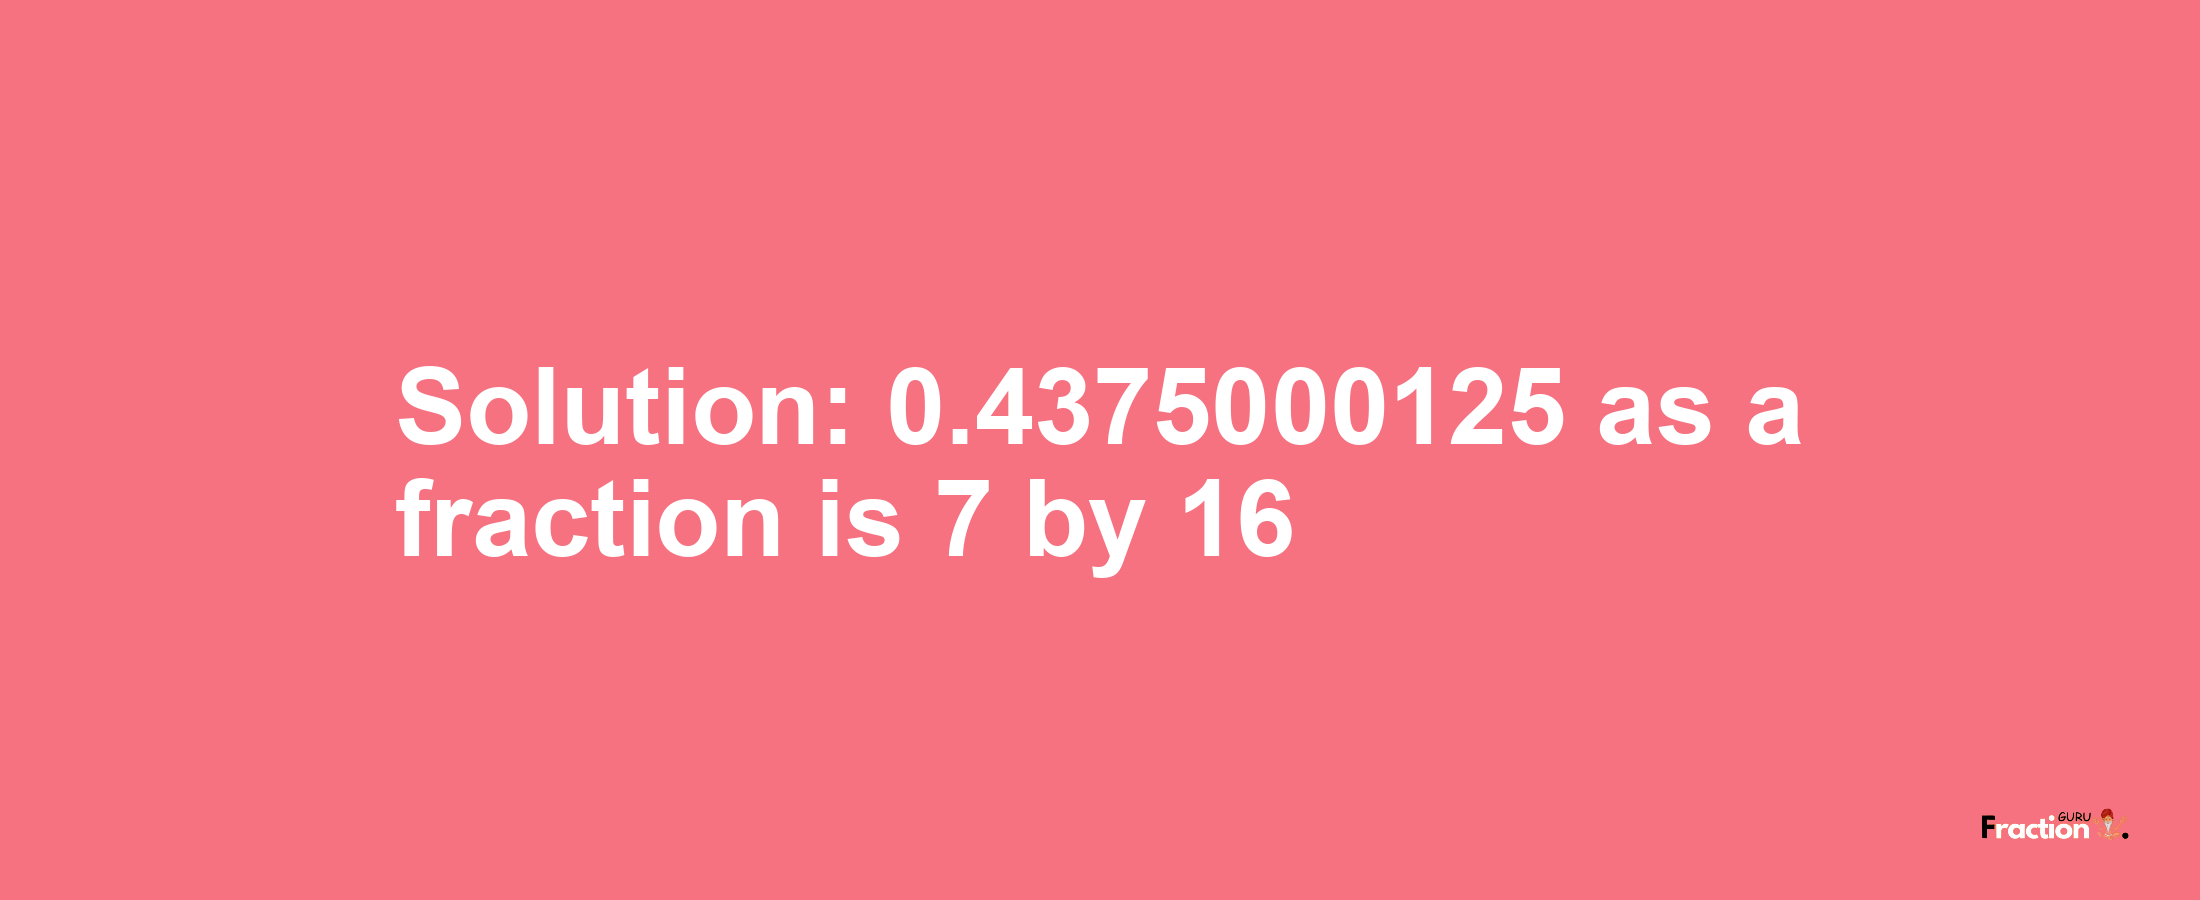 Solution:0.4375000125 as a fraction is 7/16